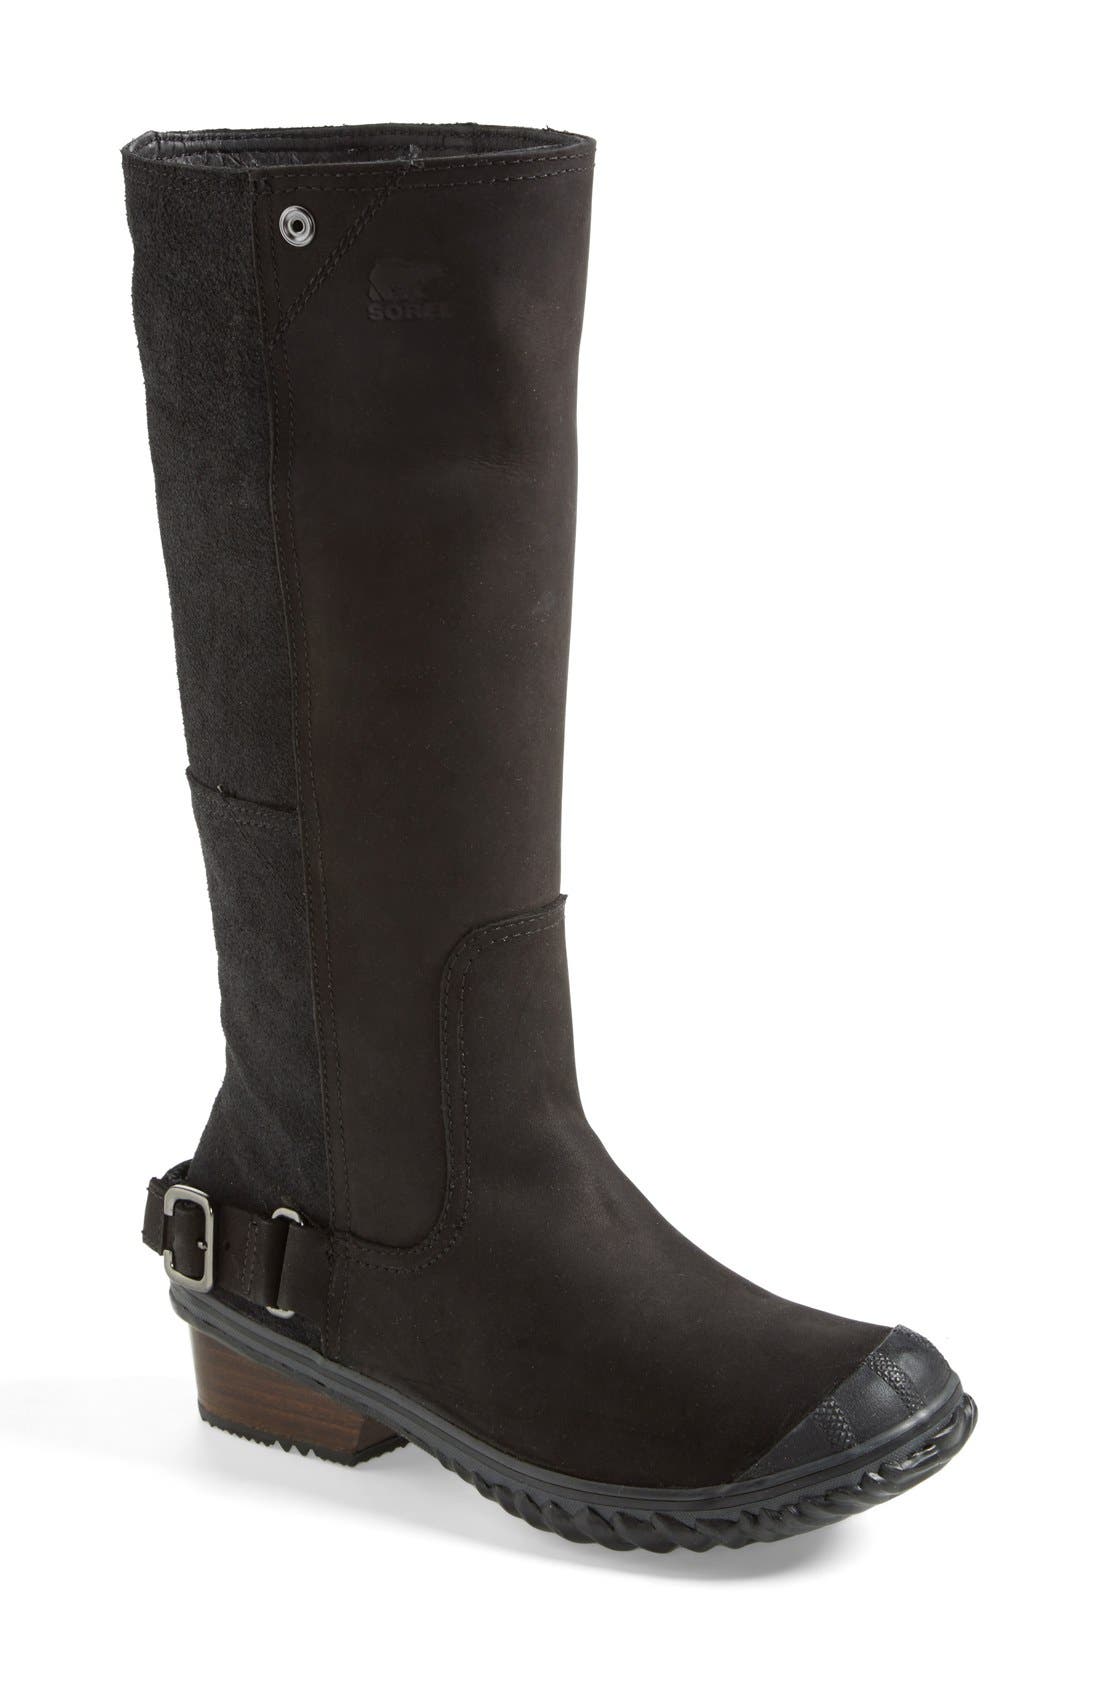 sorel waterproof tall leather boots